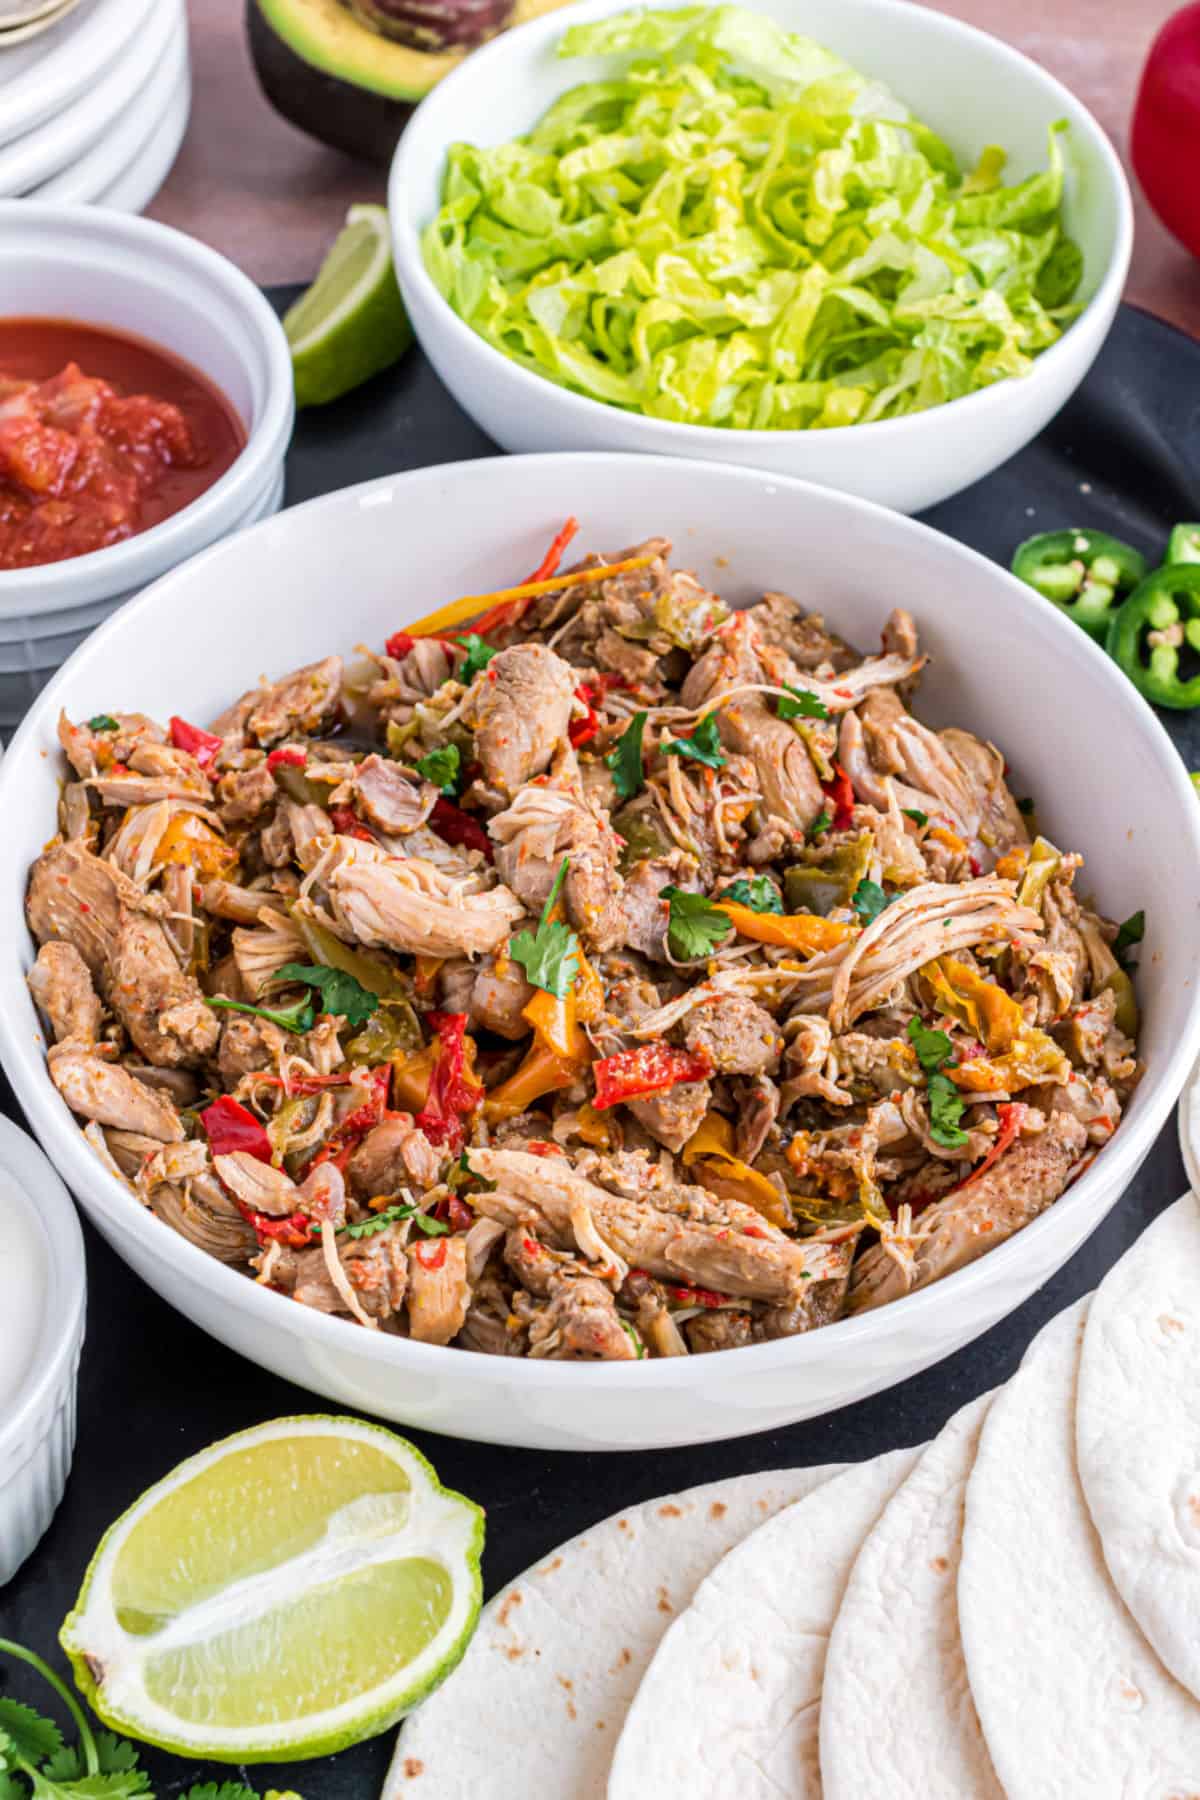 Chicken fajitas in a serving bowl with toppings on the side.